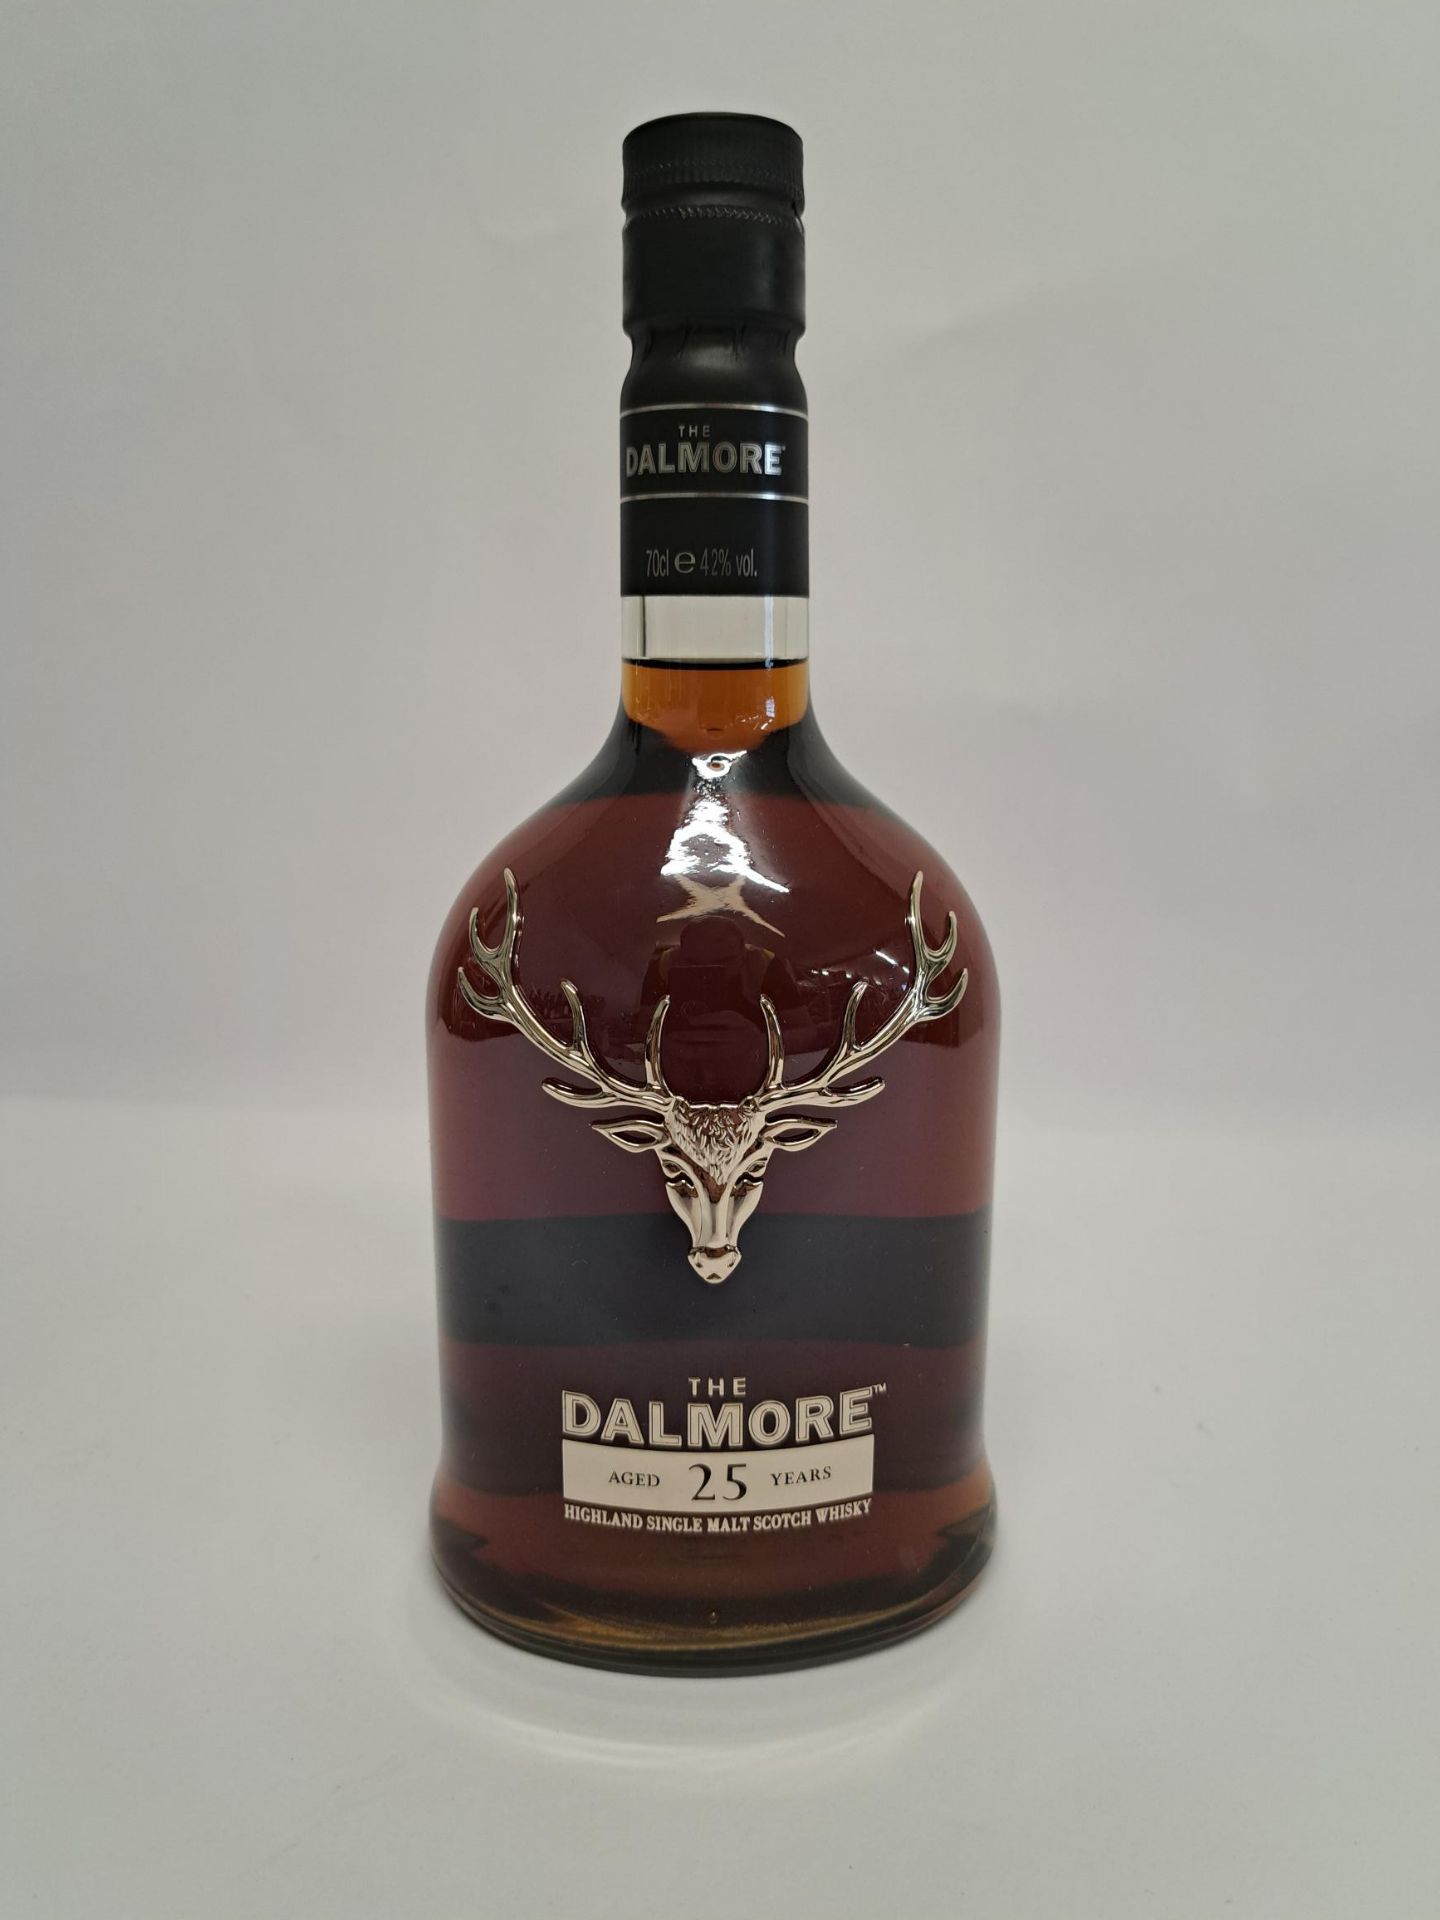 The Dalmore Aged 25 Year Highland Single Malt Scotch Whisky 700ml. Box Unsealed By Staff Member to c - Image 2 of 8